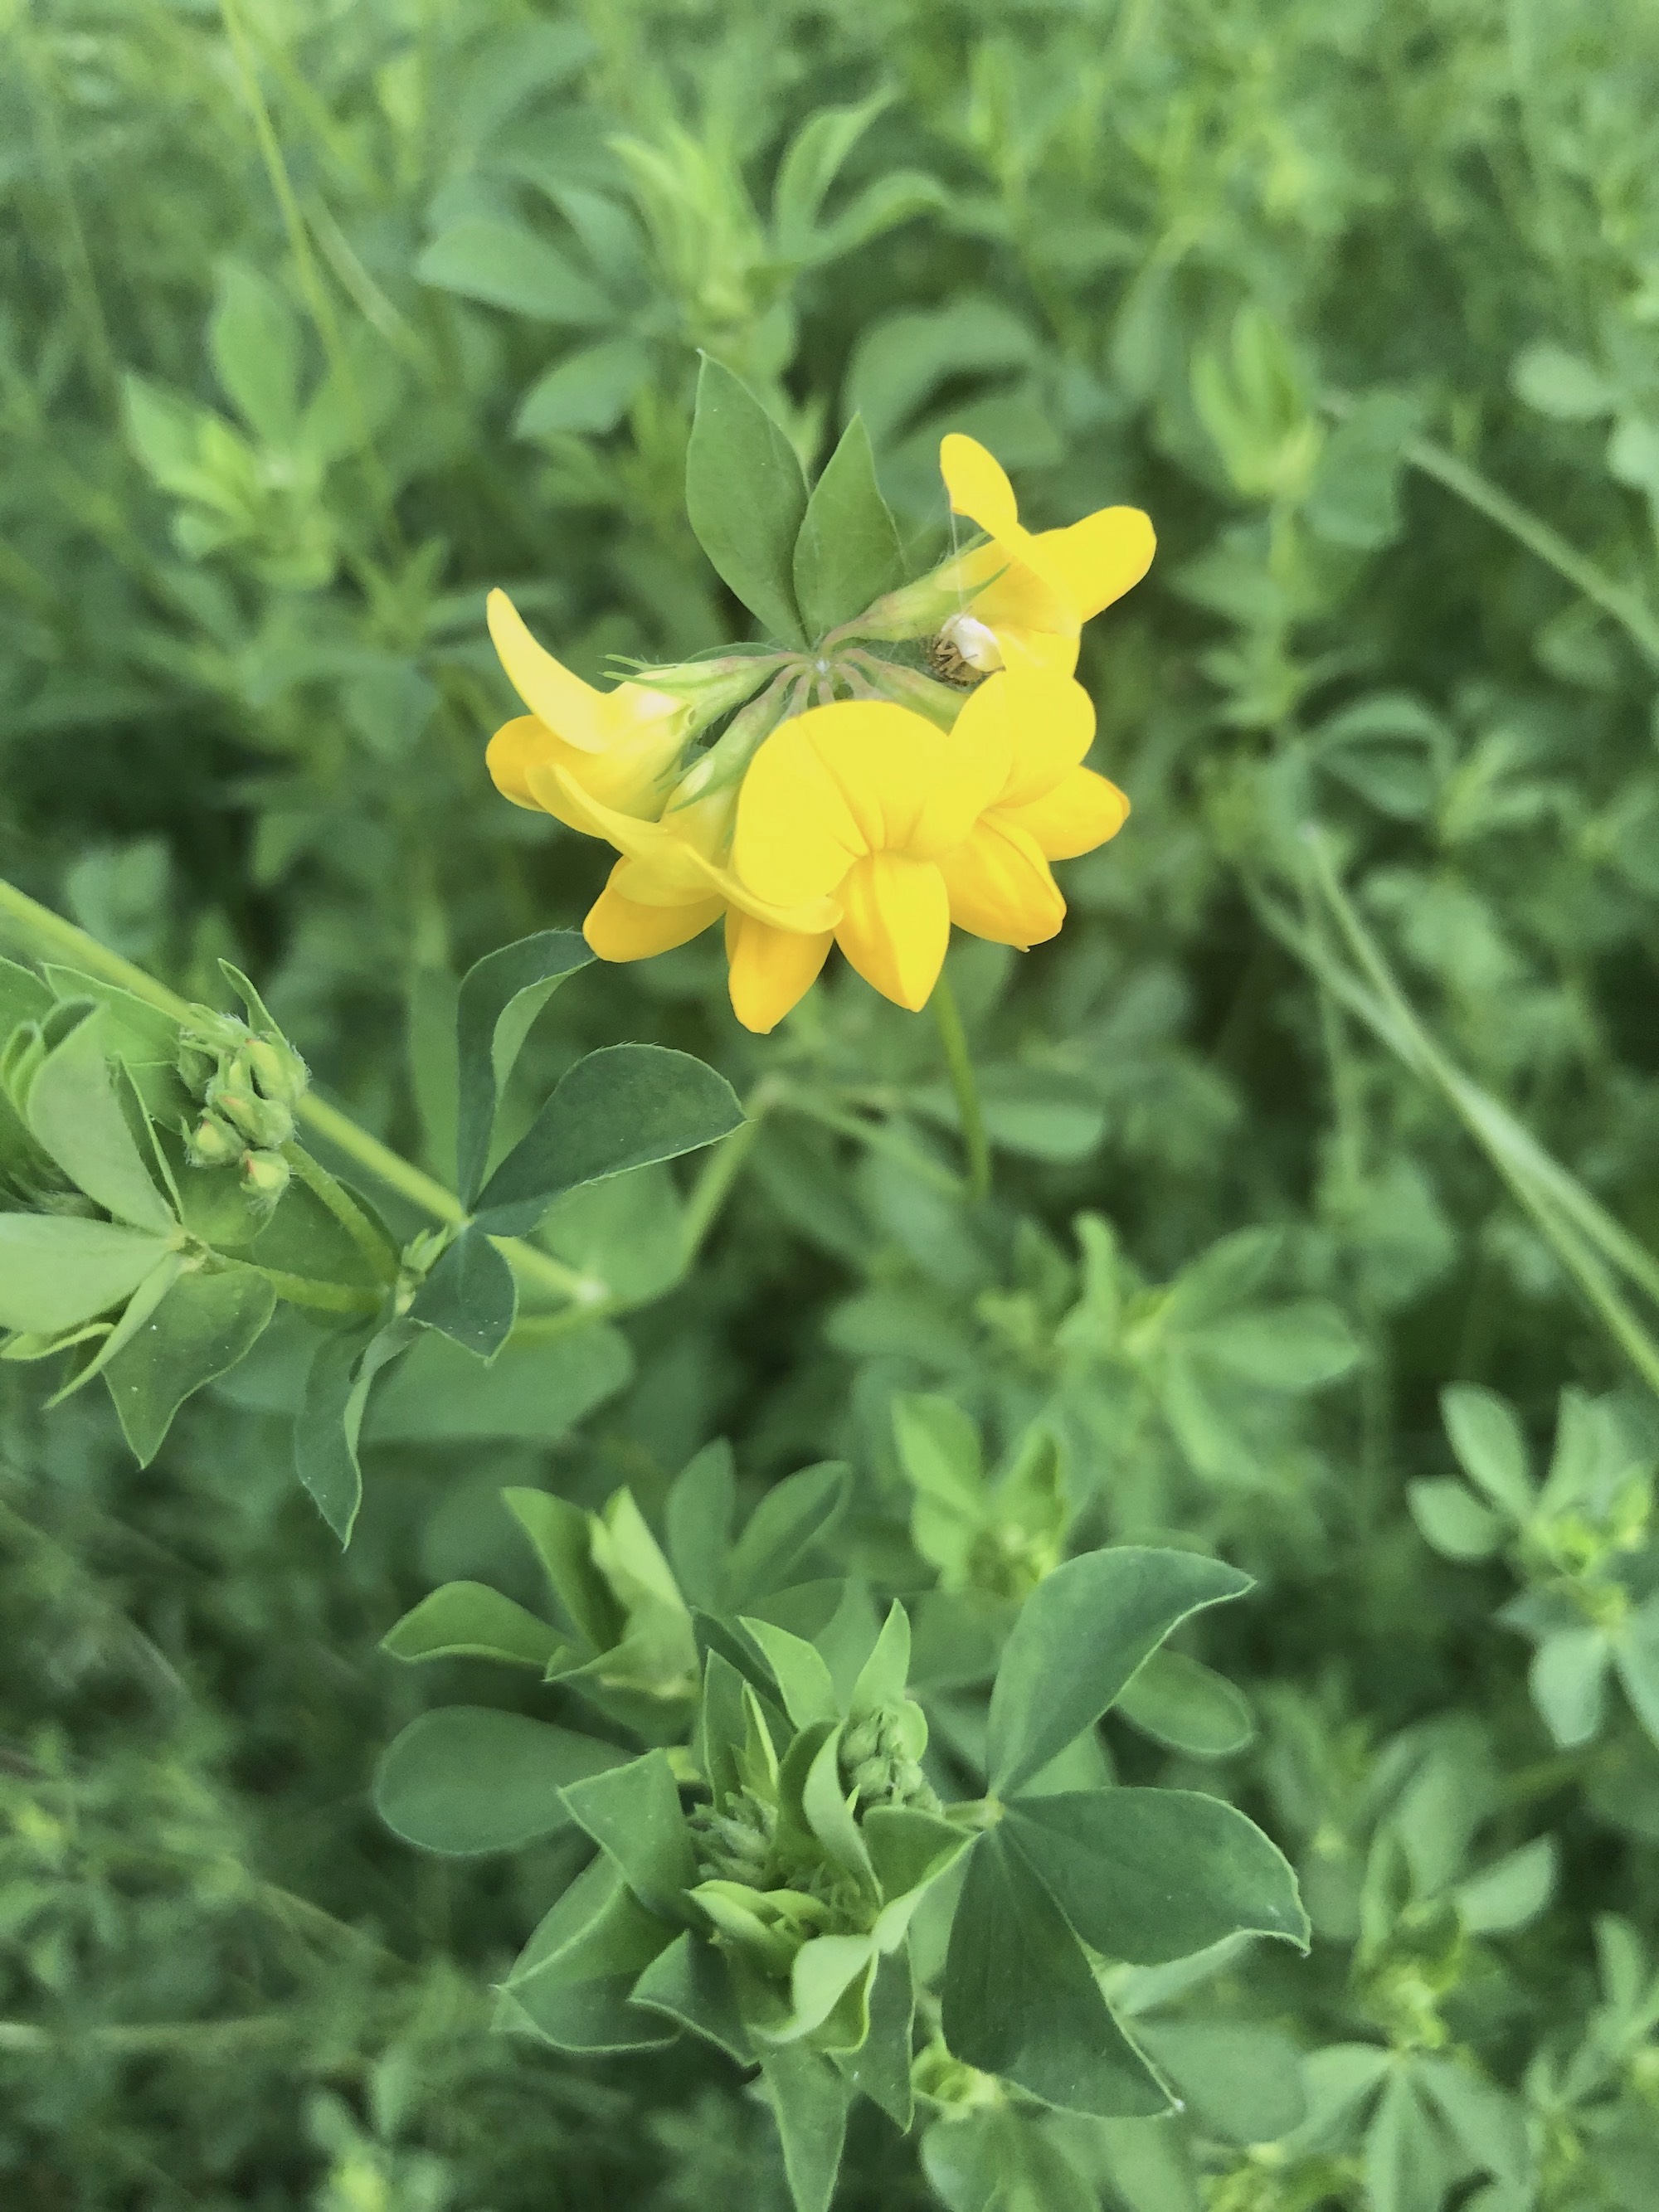 Bird's-foot Trefoil by Duck Pond Parking Lot in Madison, Wisconsin on June 04, 2020.